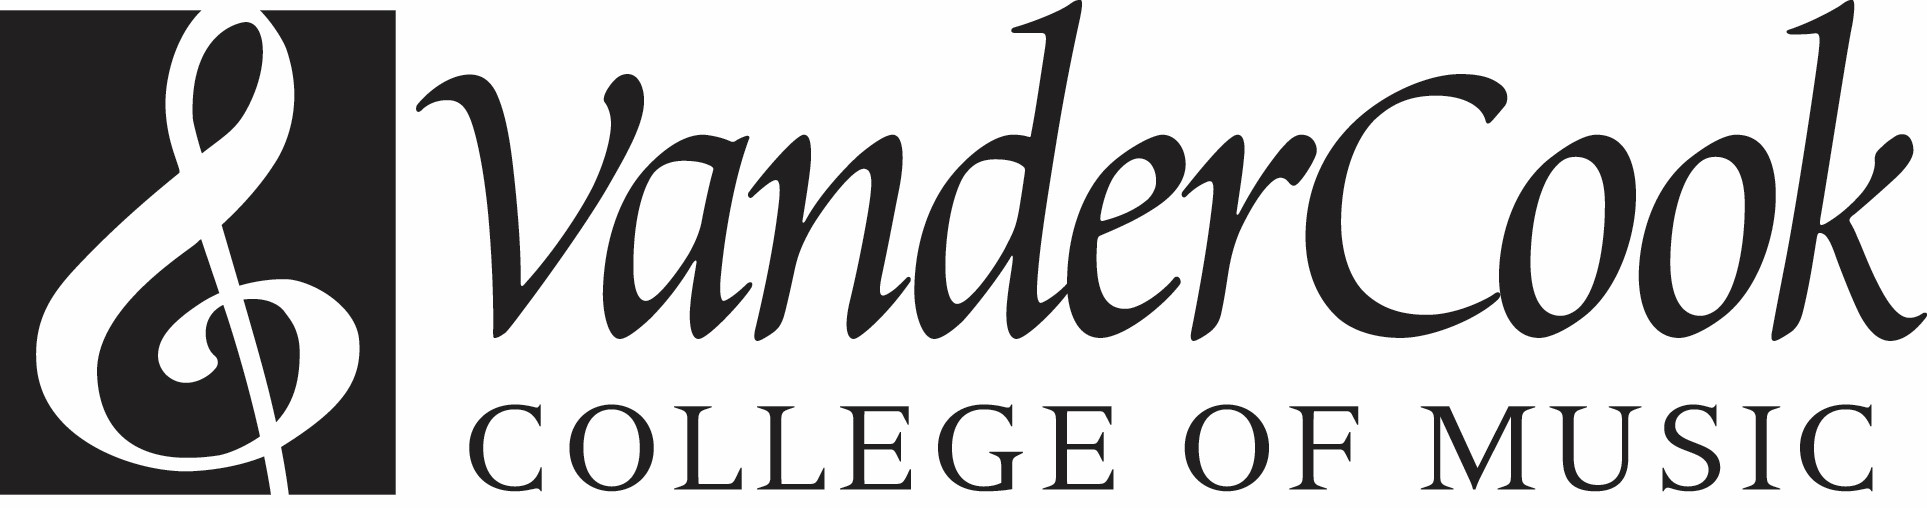 VanderCook College of Music logo with treble clef outlined in white on a black square